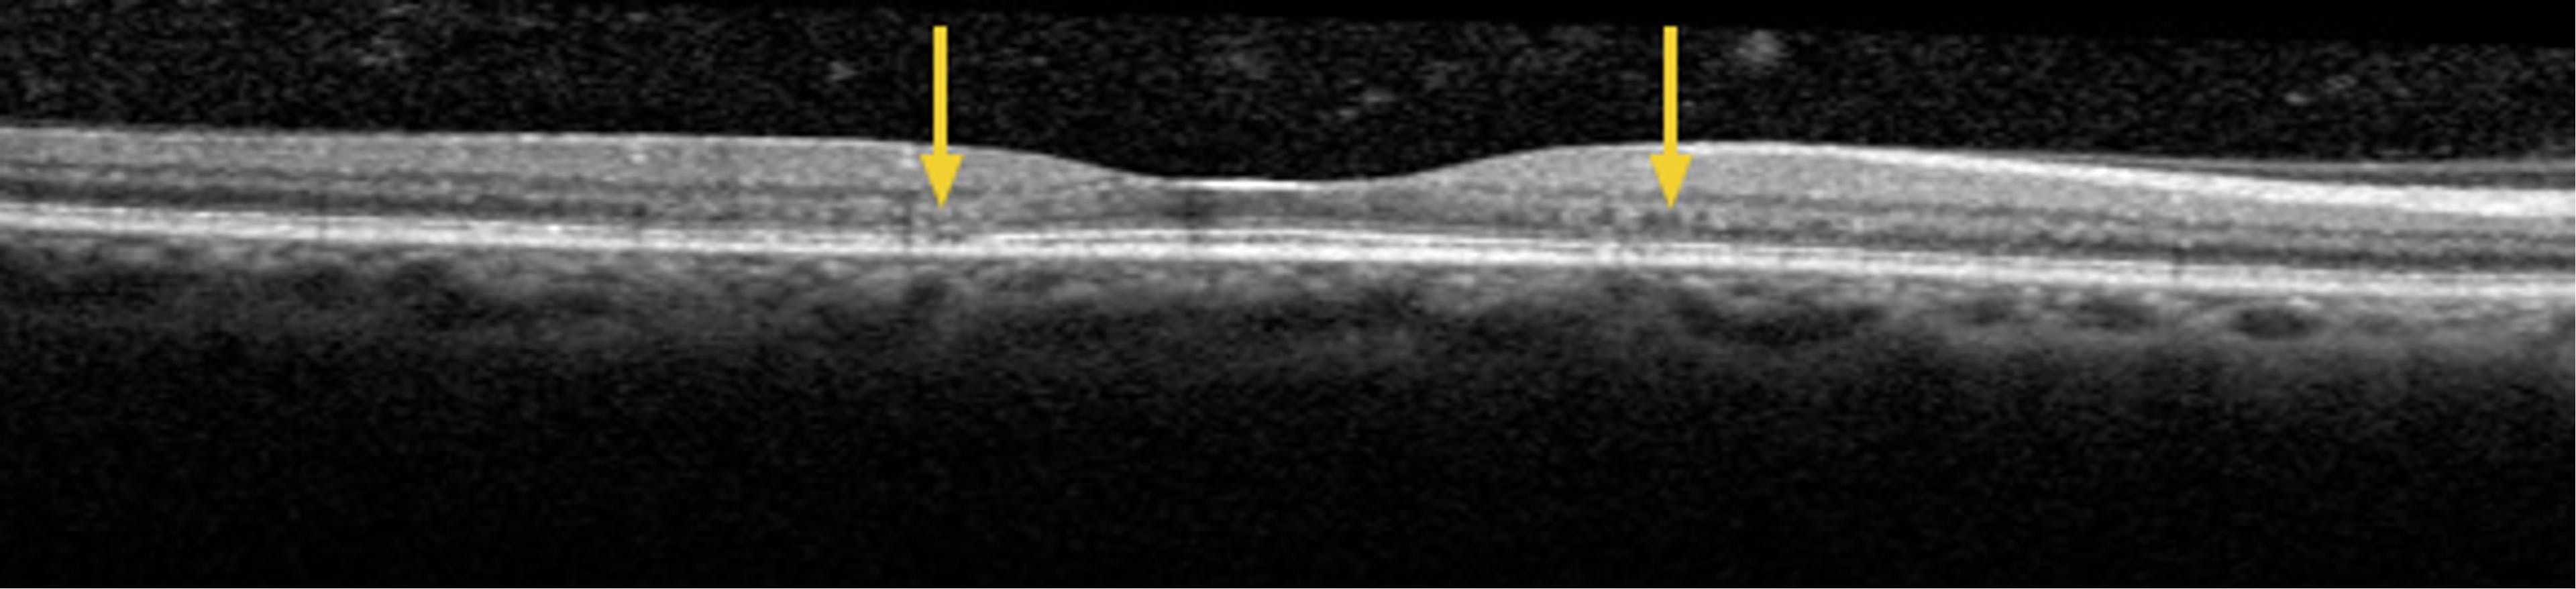 Figure 5. SD-OCT imaging of the right eye with the scan line adjusted to the area just below the fovea. Arrows point to a more obvious area of attenuation of the ELM and IS/OS line temporal to the fovea and a more subtle area of early attenuation nasal to the fovea.